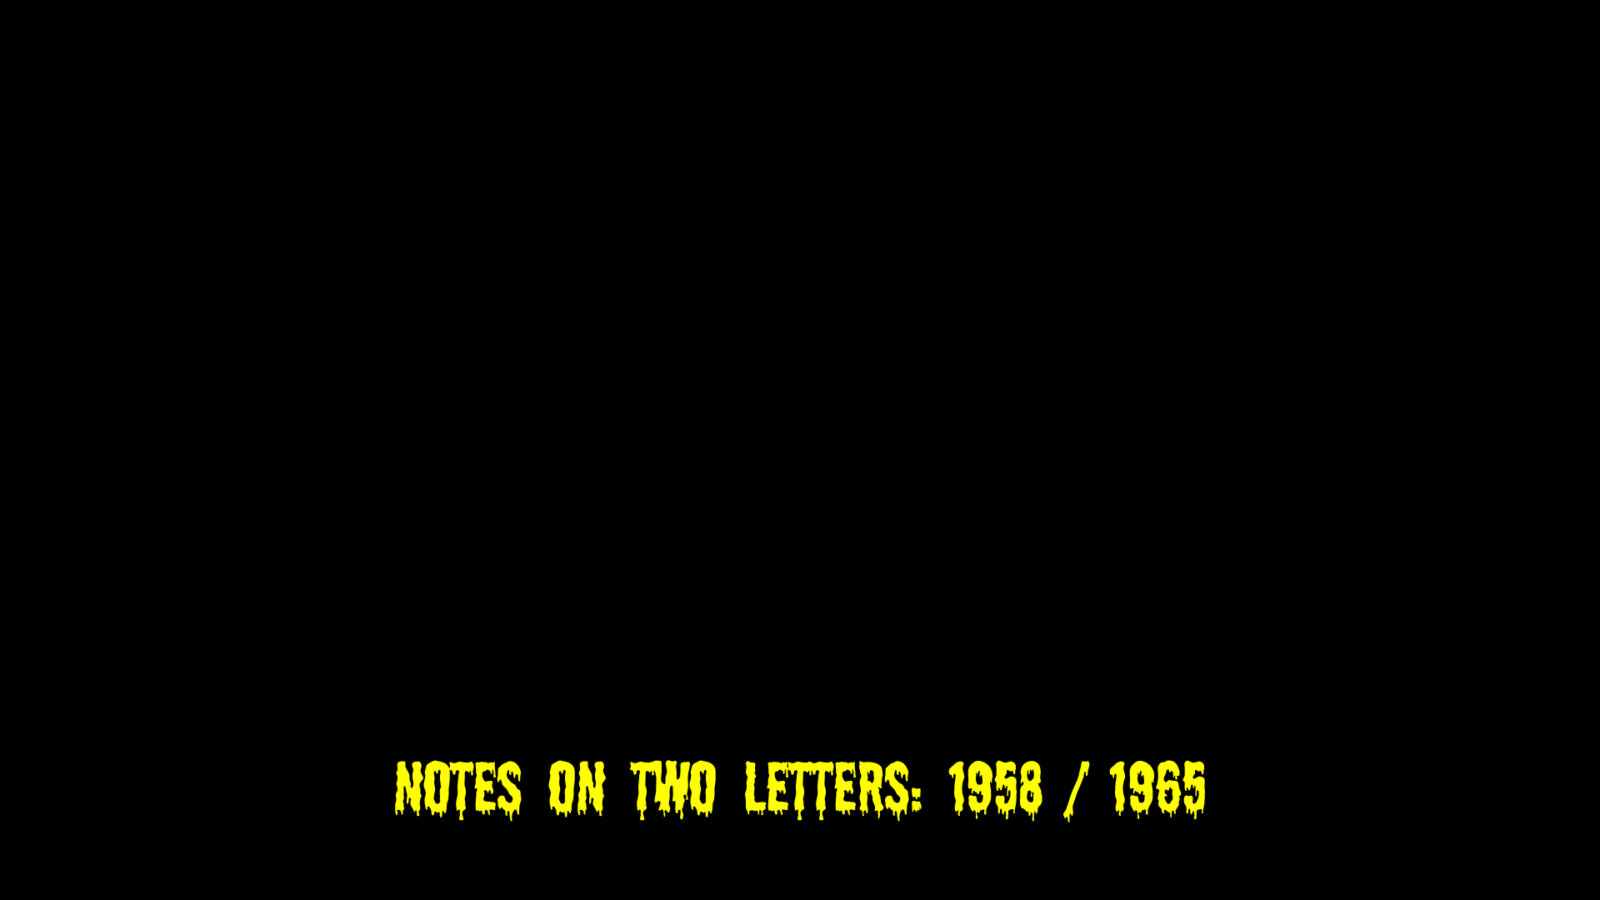 Raymond Boisjoly, Notes on Two Letters: 1958/1965 (still), 2011, HD video projection, 4 minutes, 33 seconds